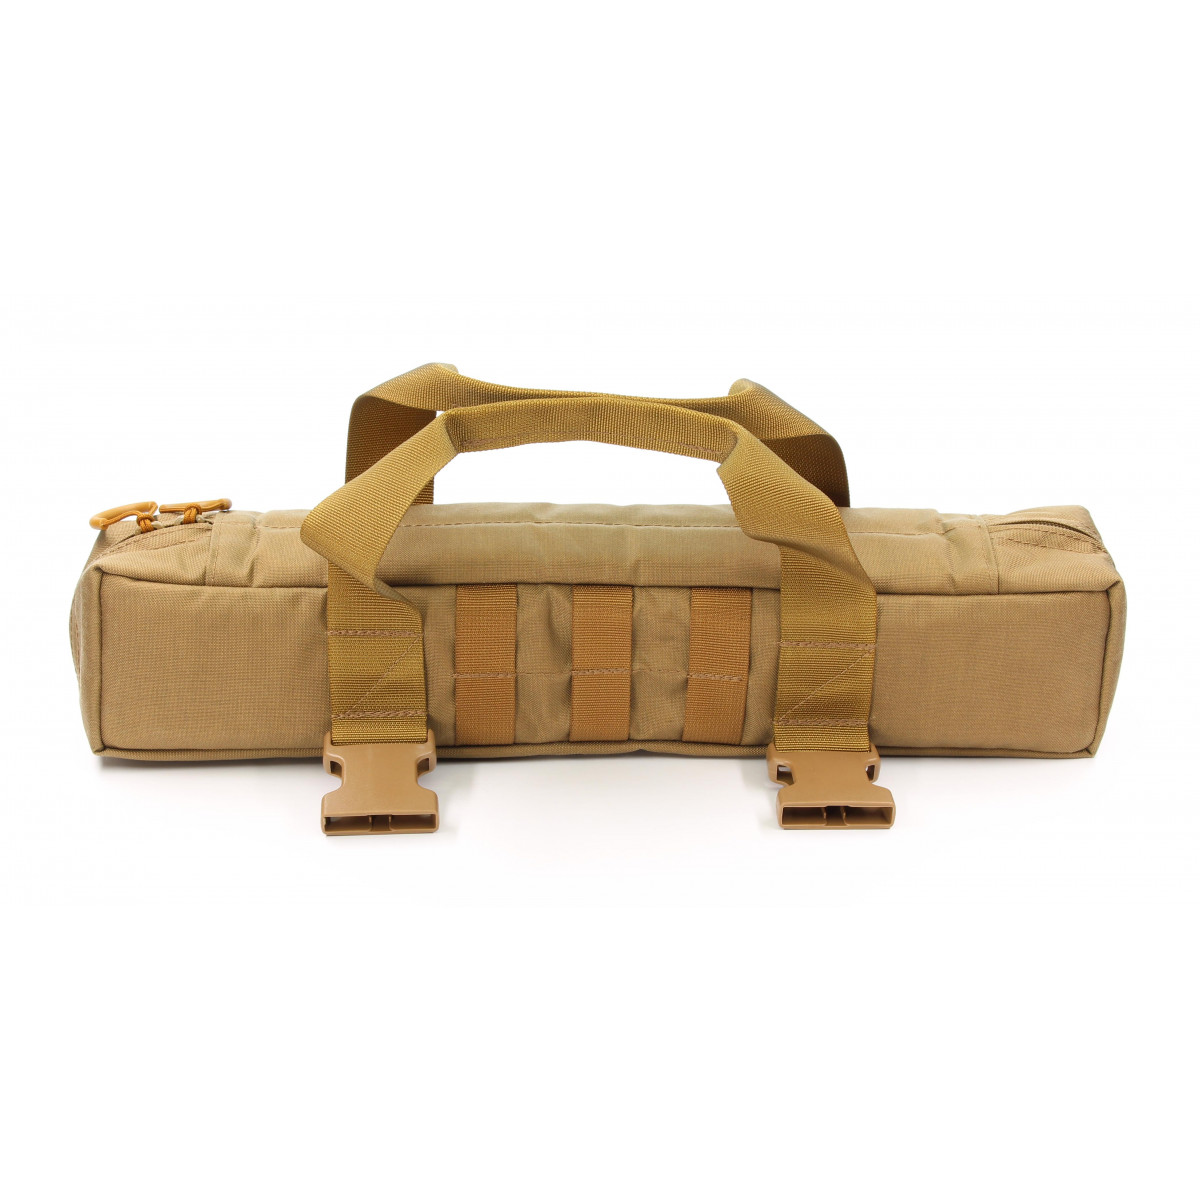 padded protective bag for scopes in coyote